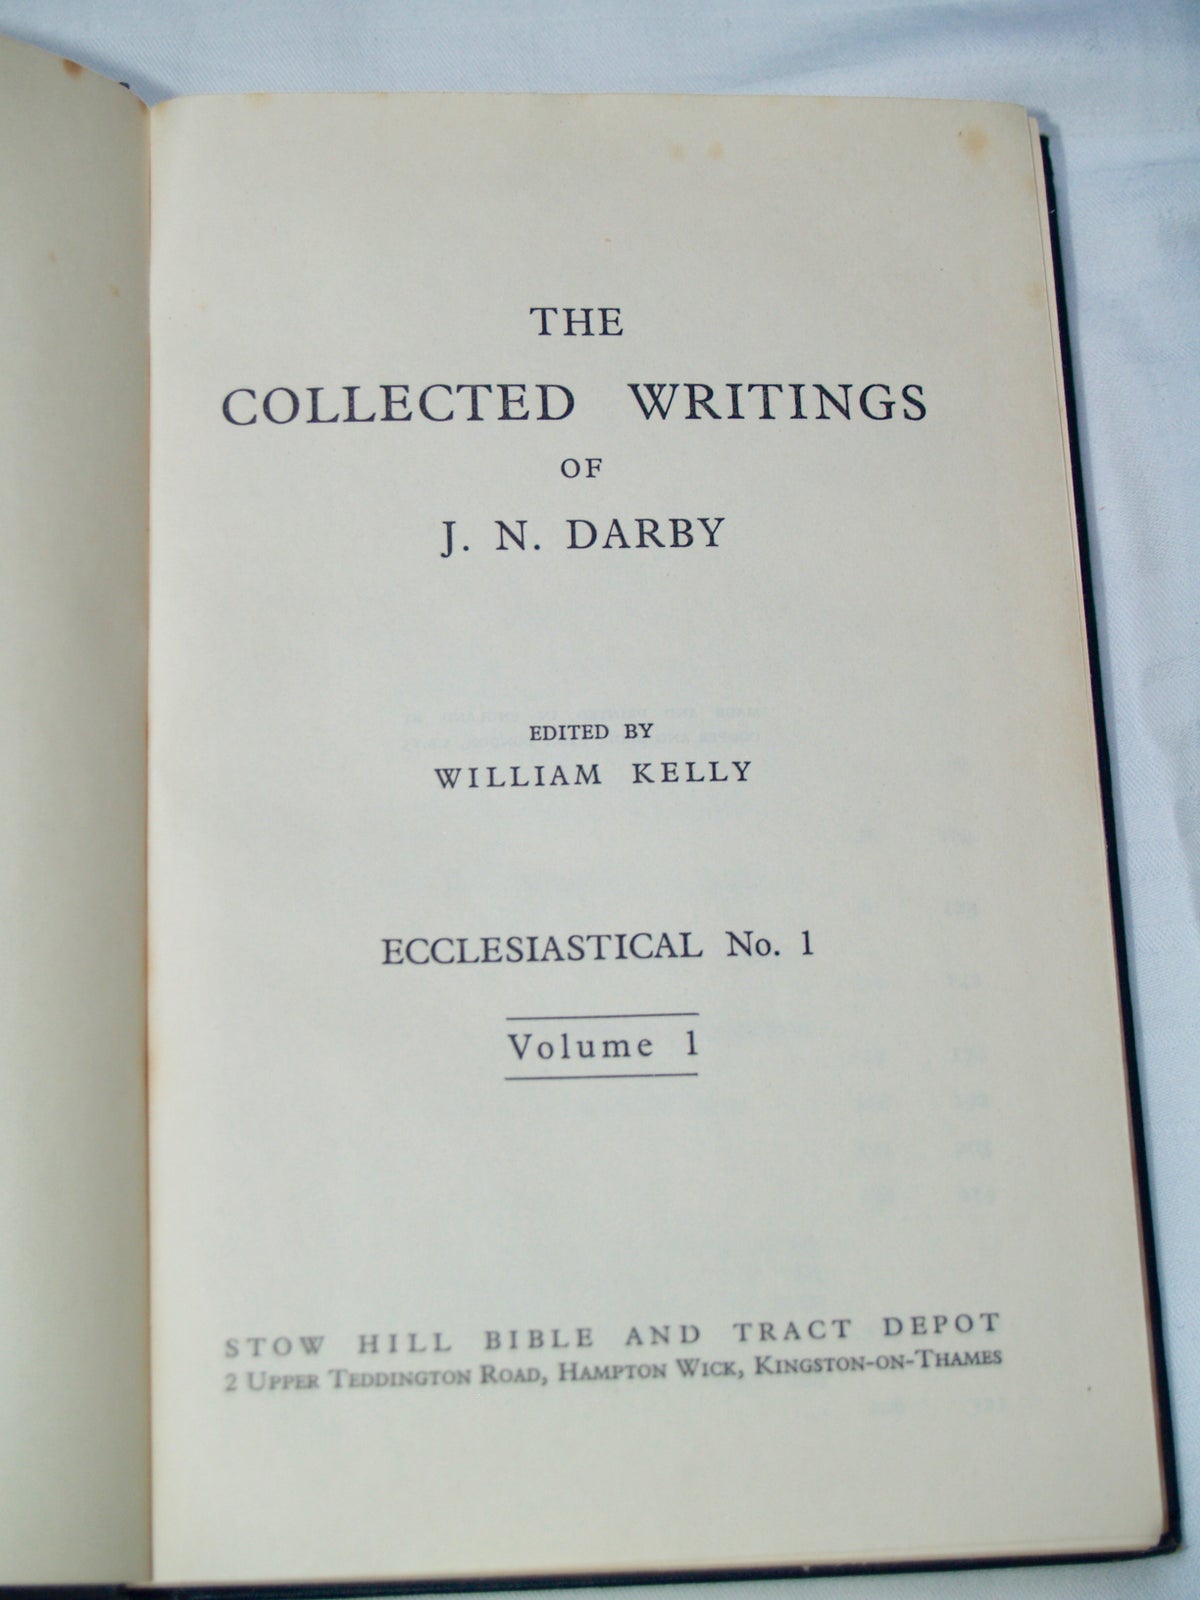 The Collected Writings, of J. N. Darby